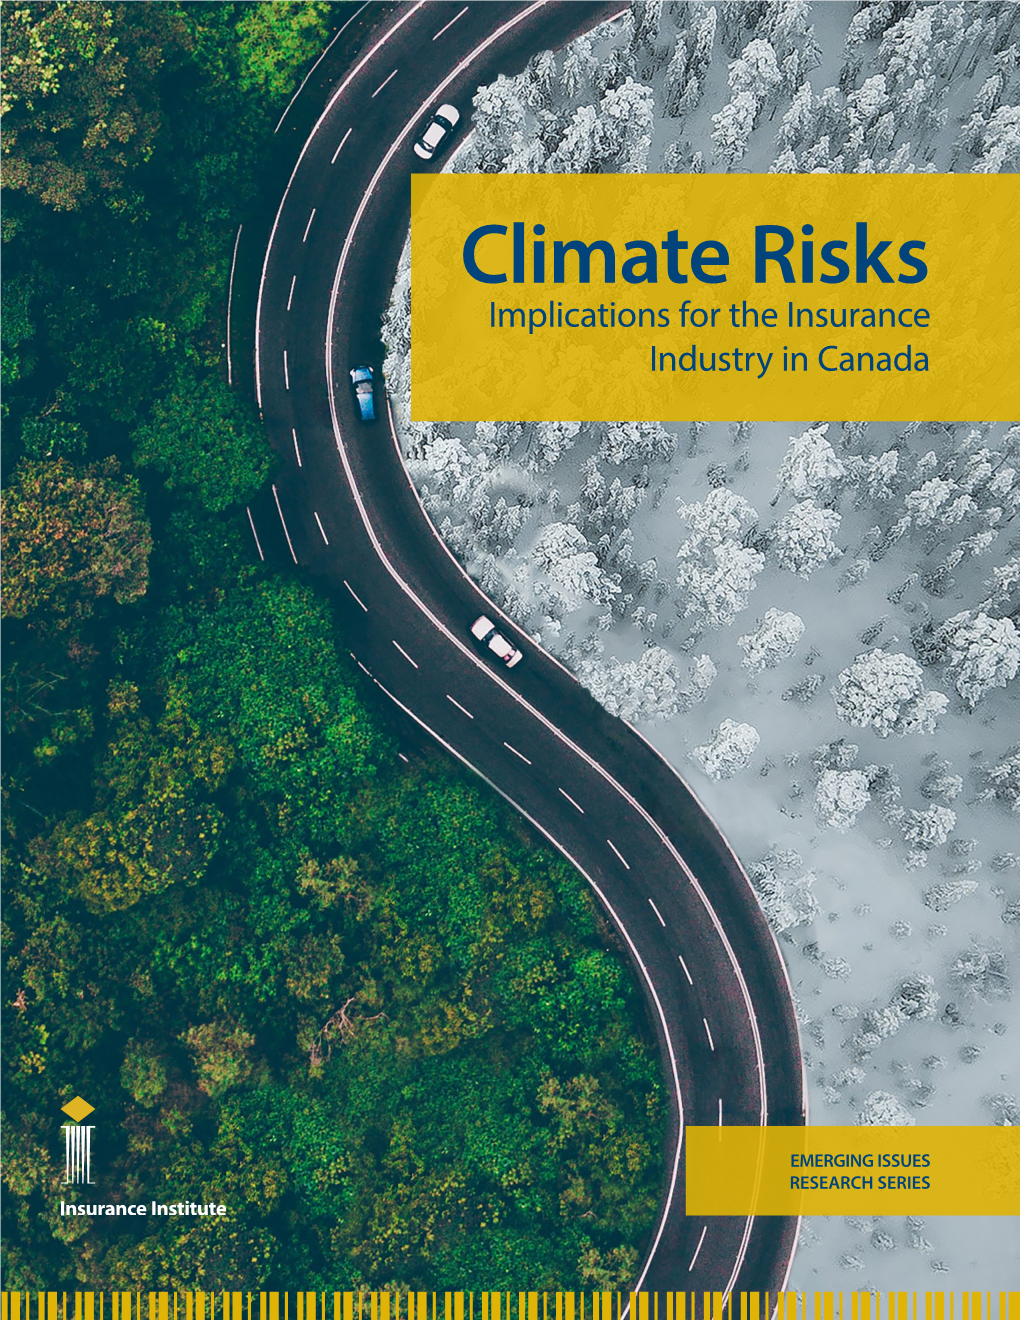 Climate Risks: Implications for the Insurance Industry in Canada, the Insurance Institute of Canada, 2020